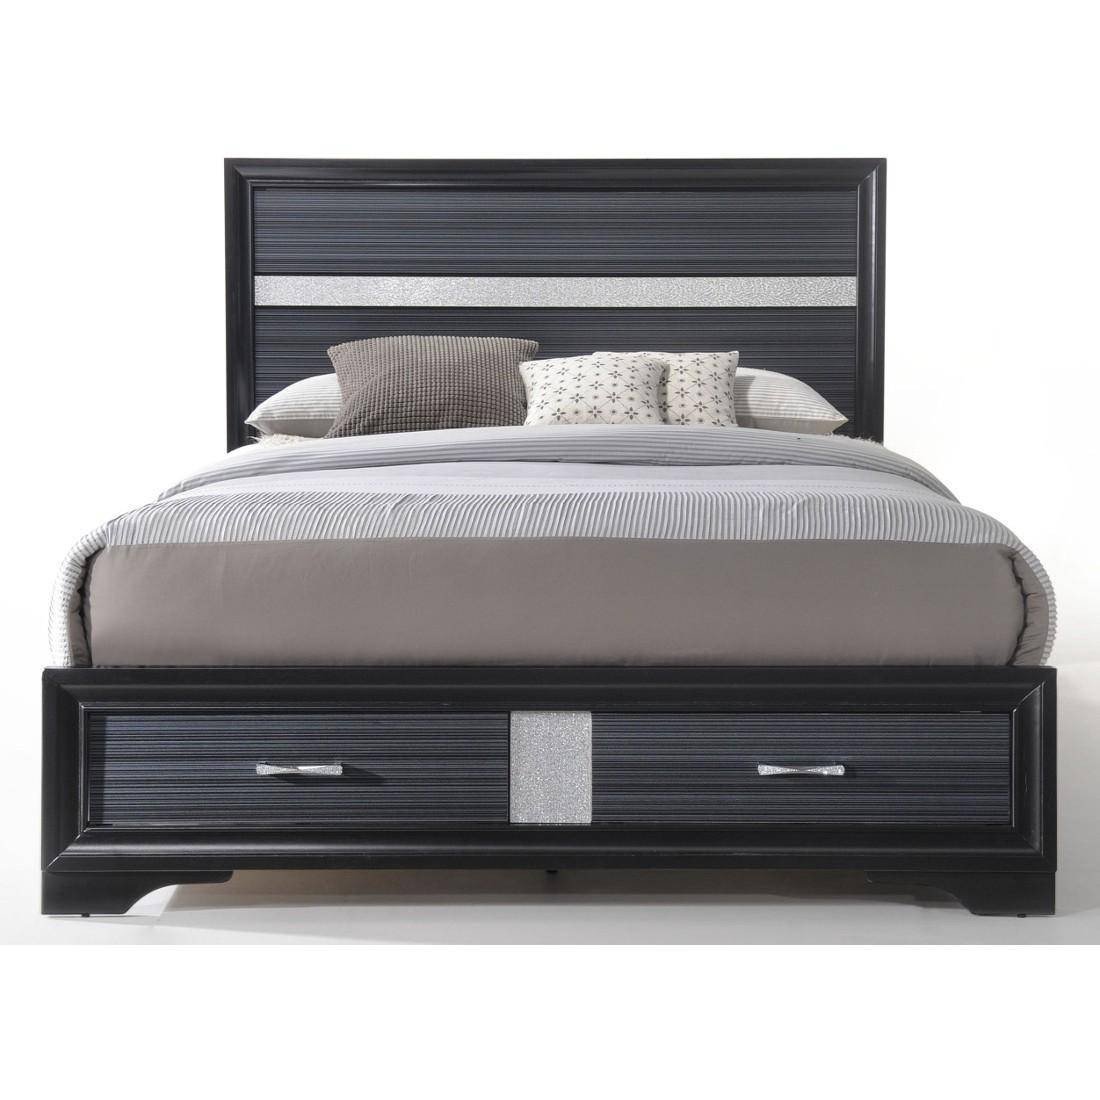 Mission Style Bedroom Furniture Awesome Black Wood Queen Storage Bedroom Set 4pcs Naima Q Acme